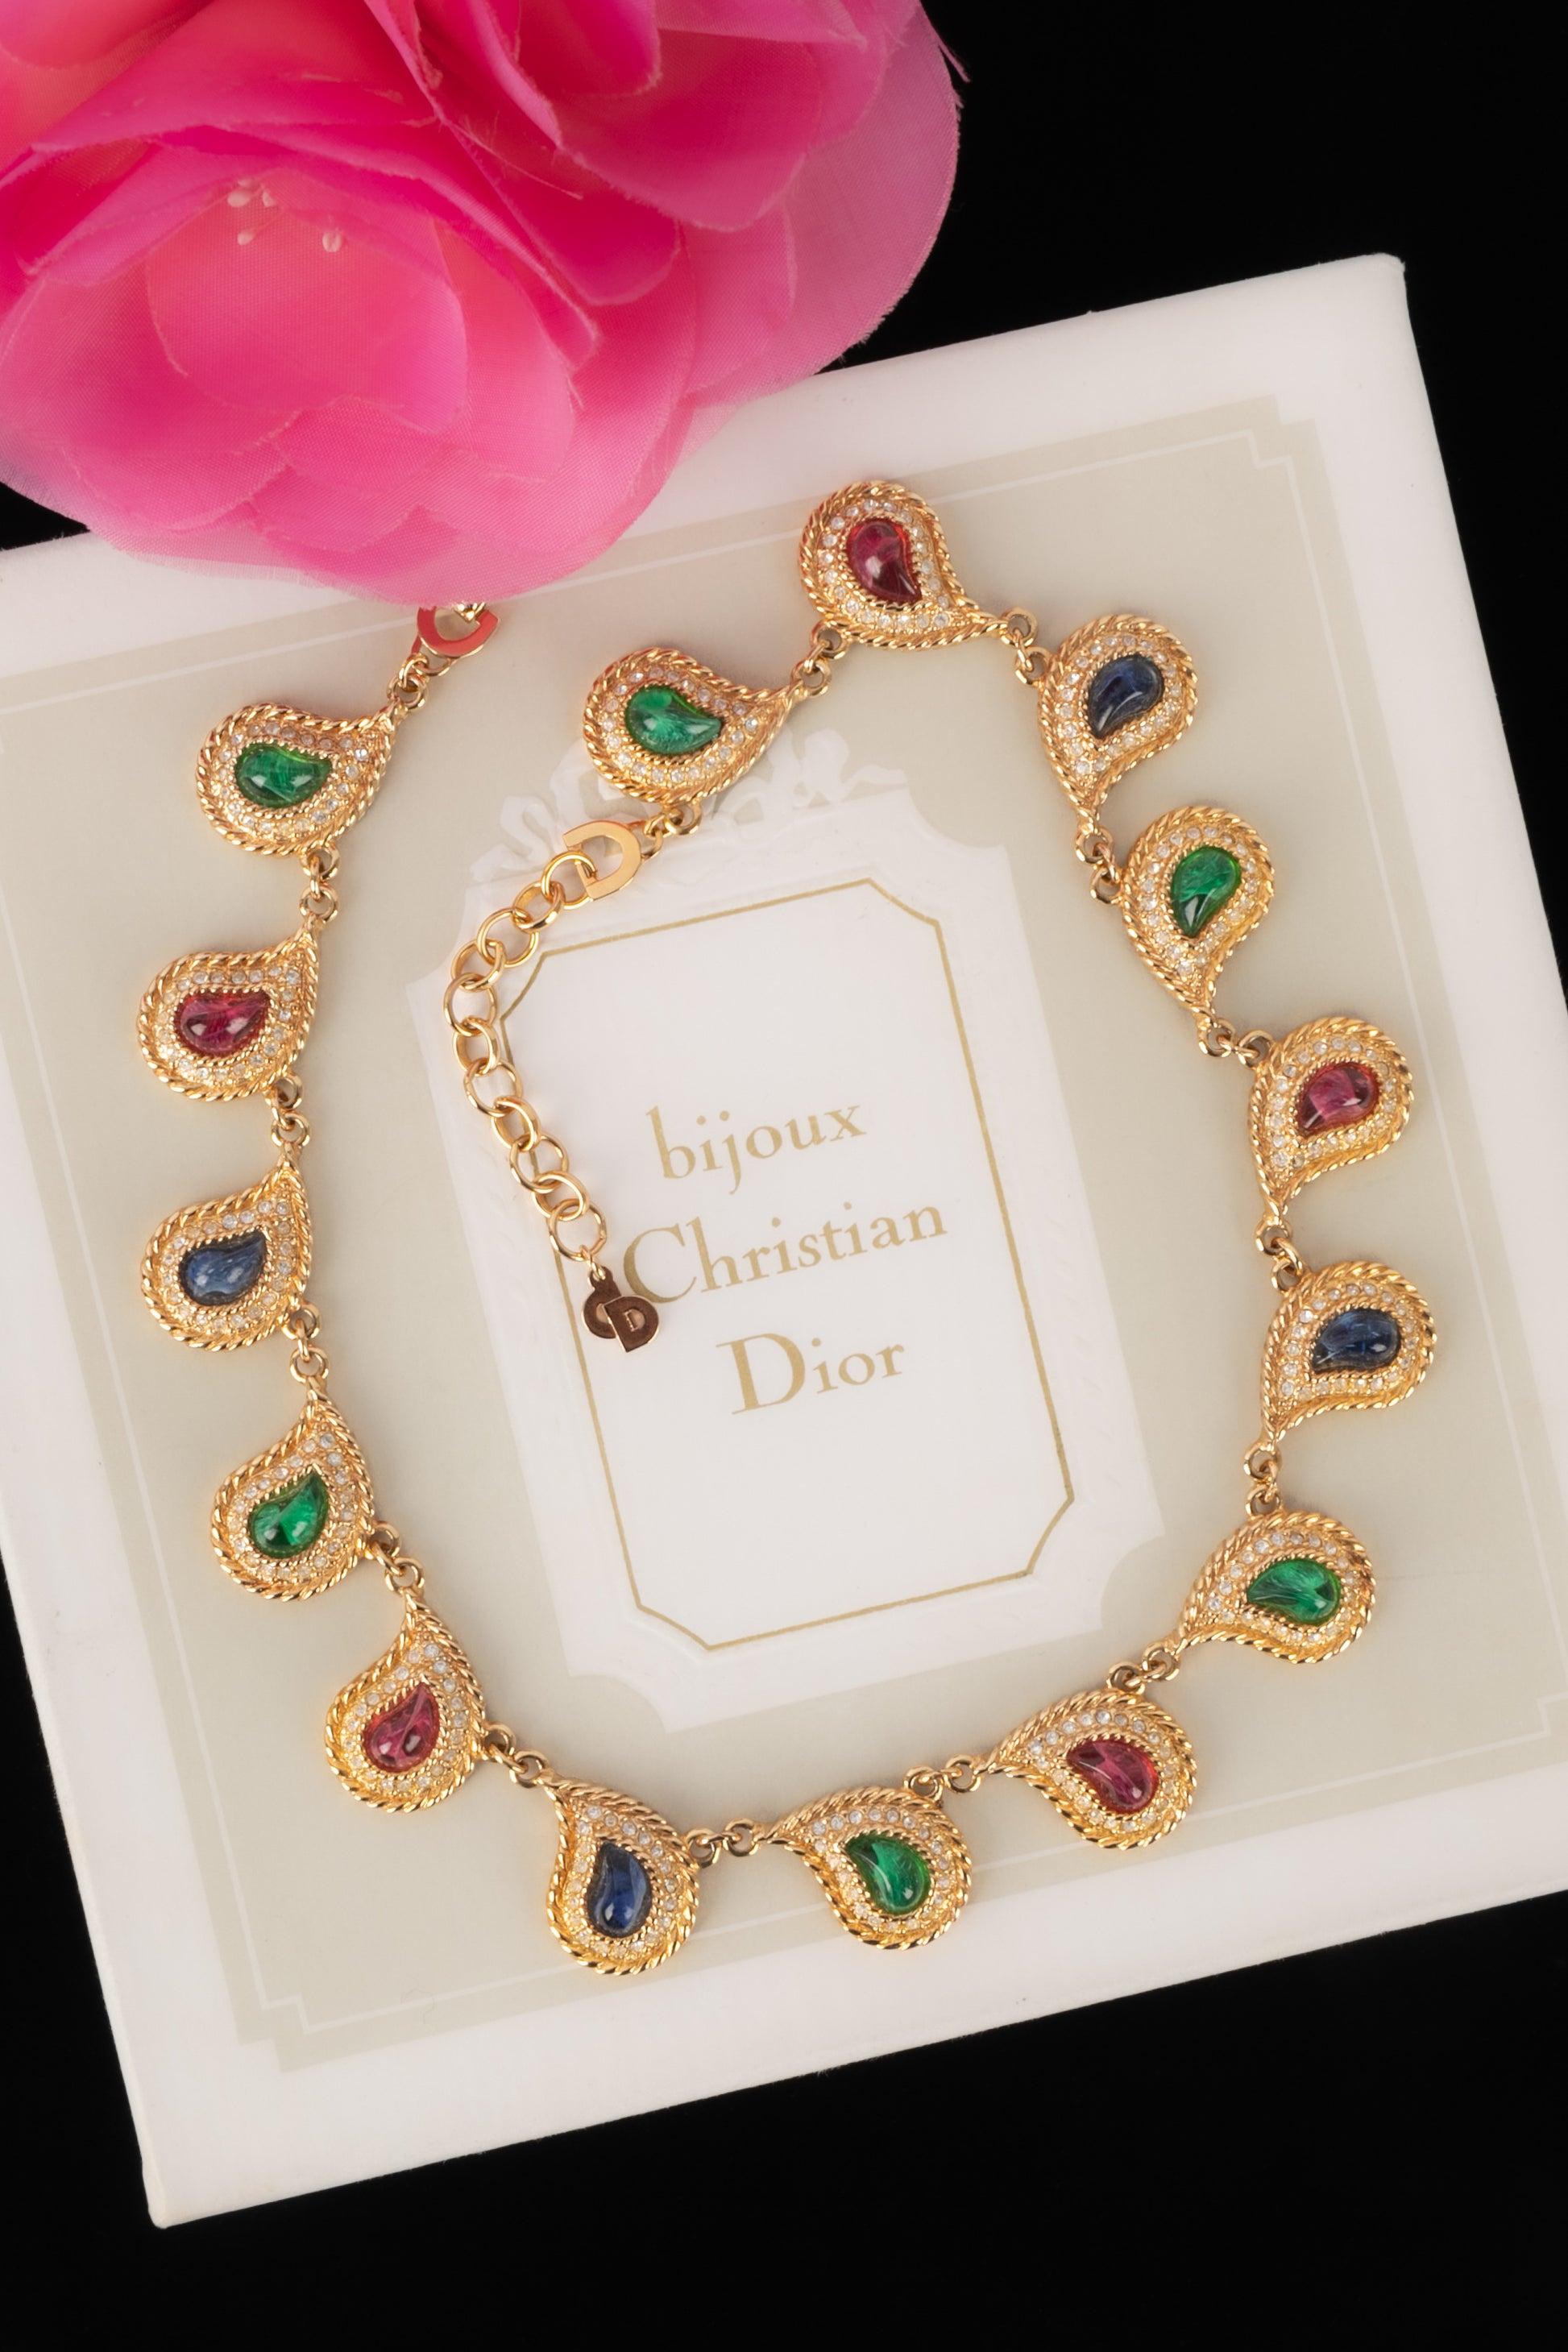 Dior - (Made in Germany) Golden metal articulated necklace with rhinestones and glass paste.

Additional information: 
Condition: Very good condition
Dimensions: Length: from 41 cm to 48 cm
 
Seller Reference: BC207